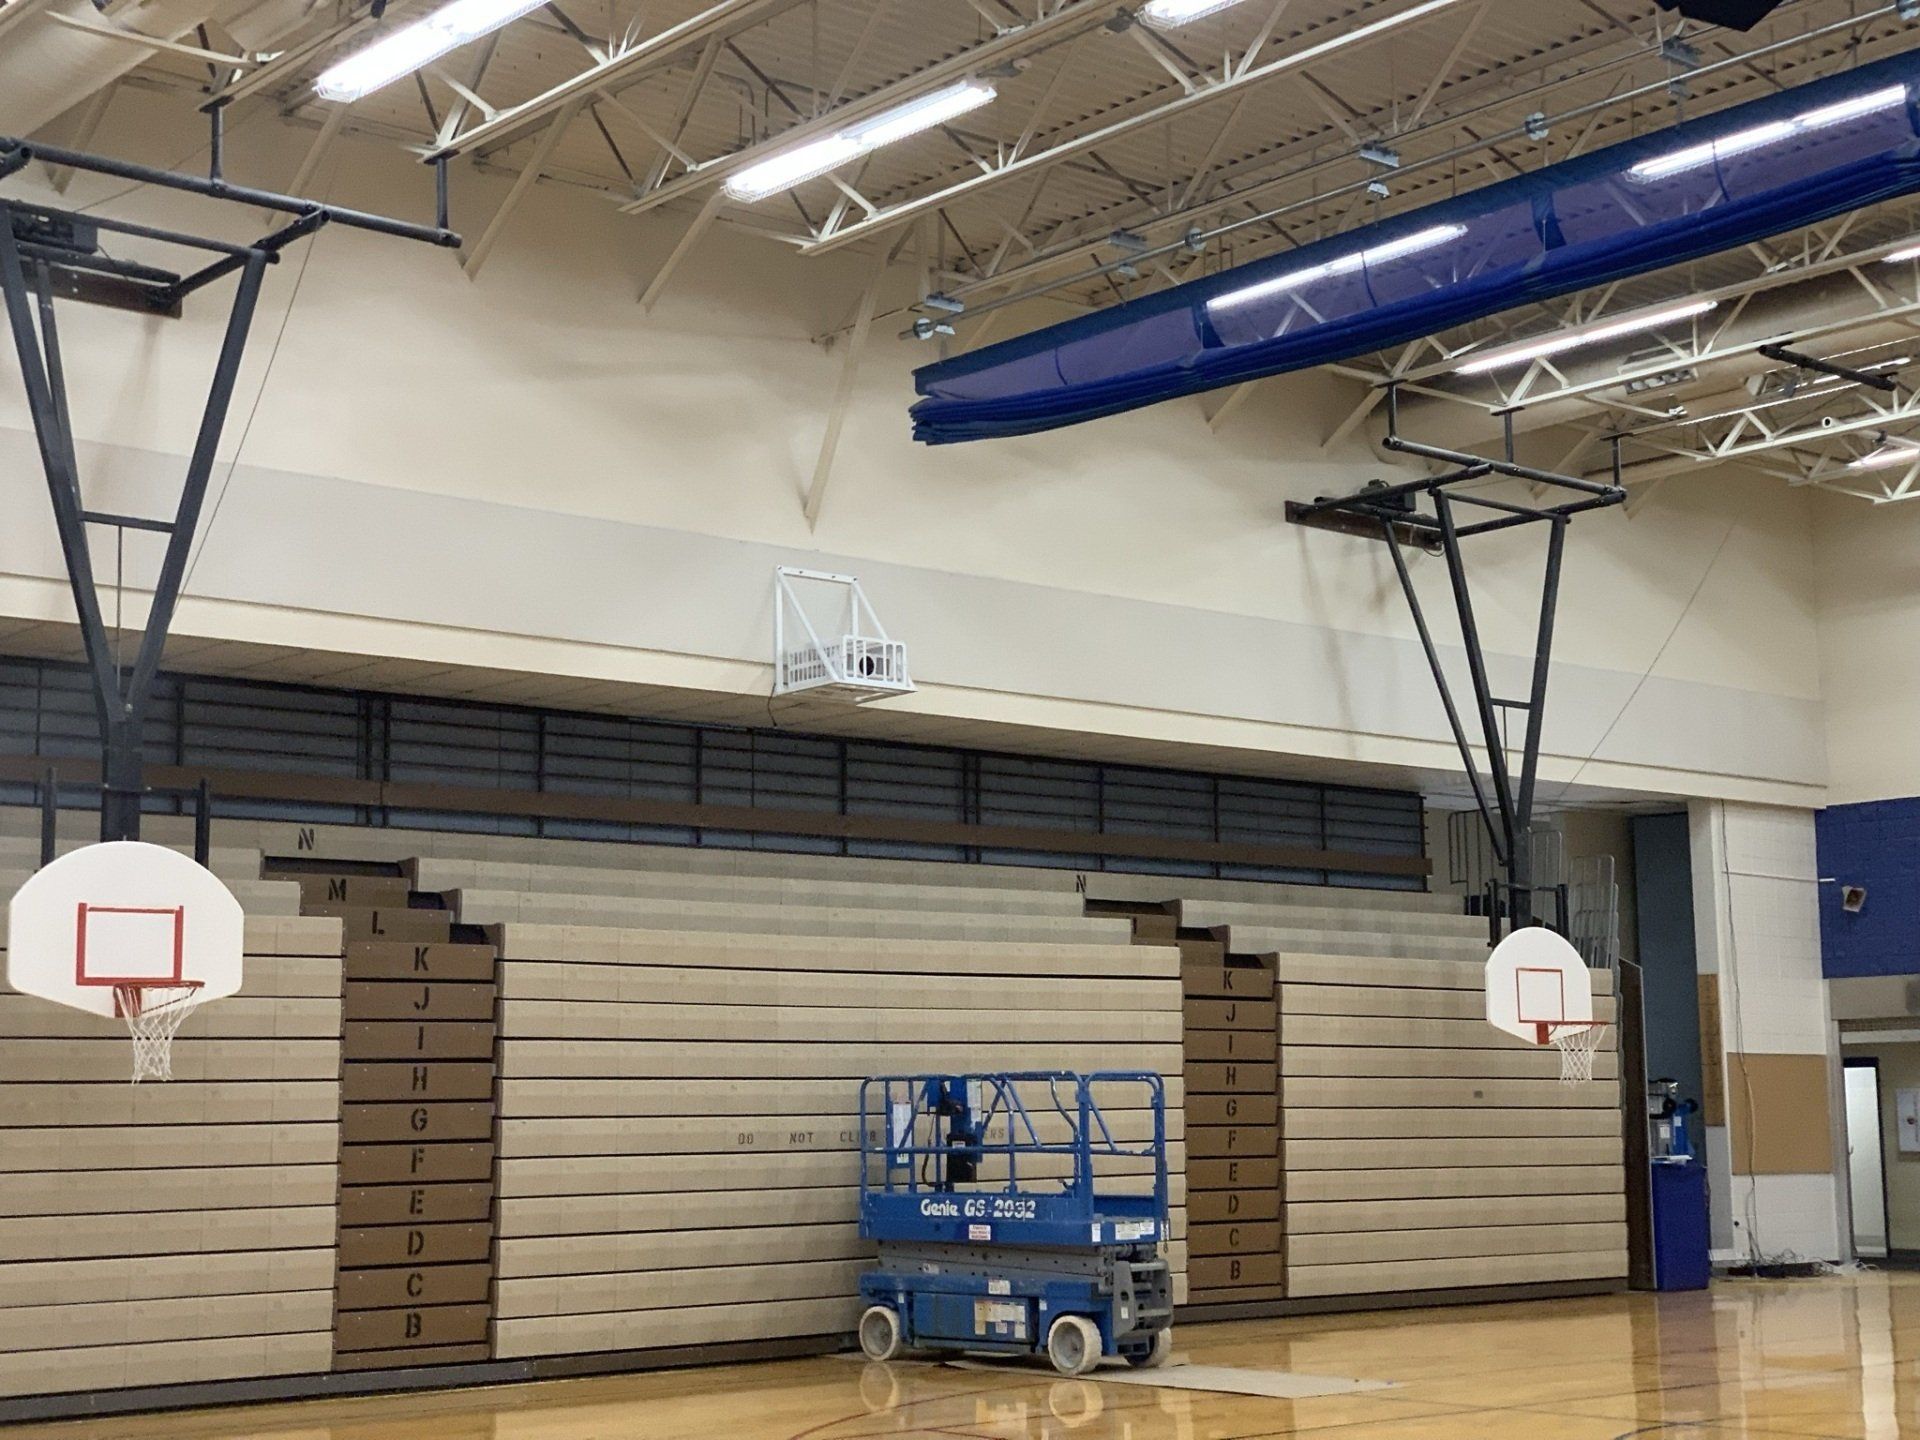 A basketball hoop is hanging from the ceiling of a gym.